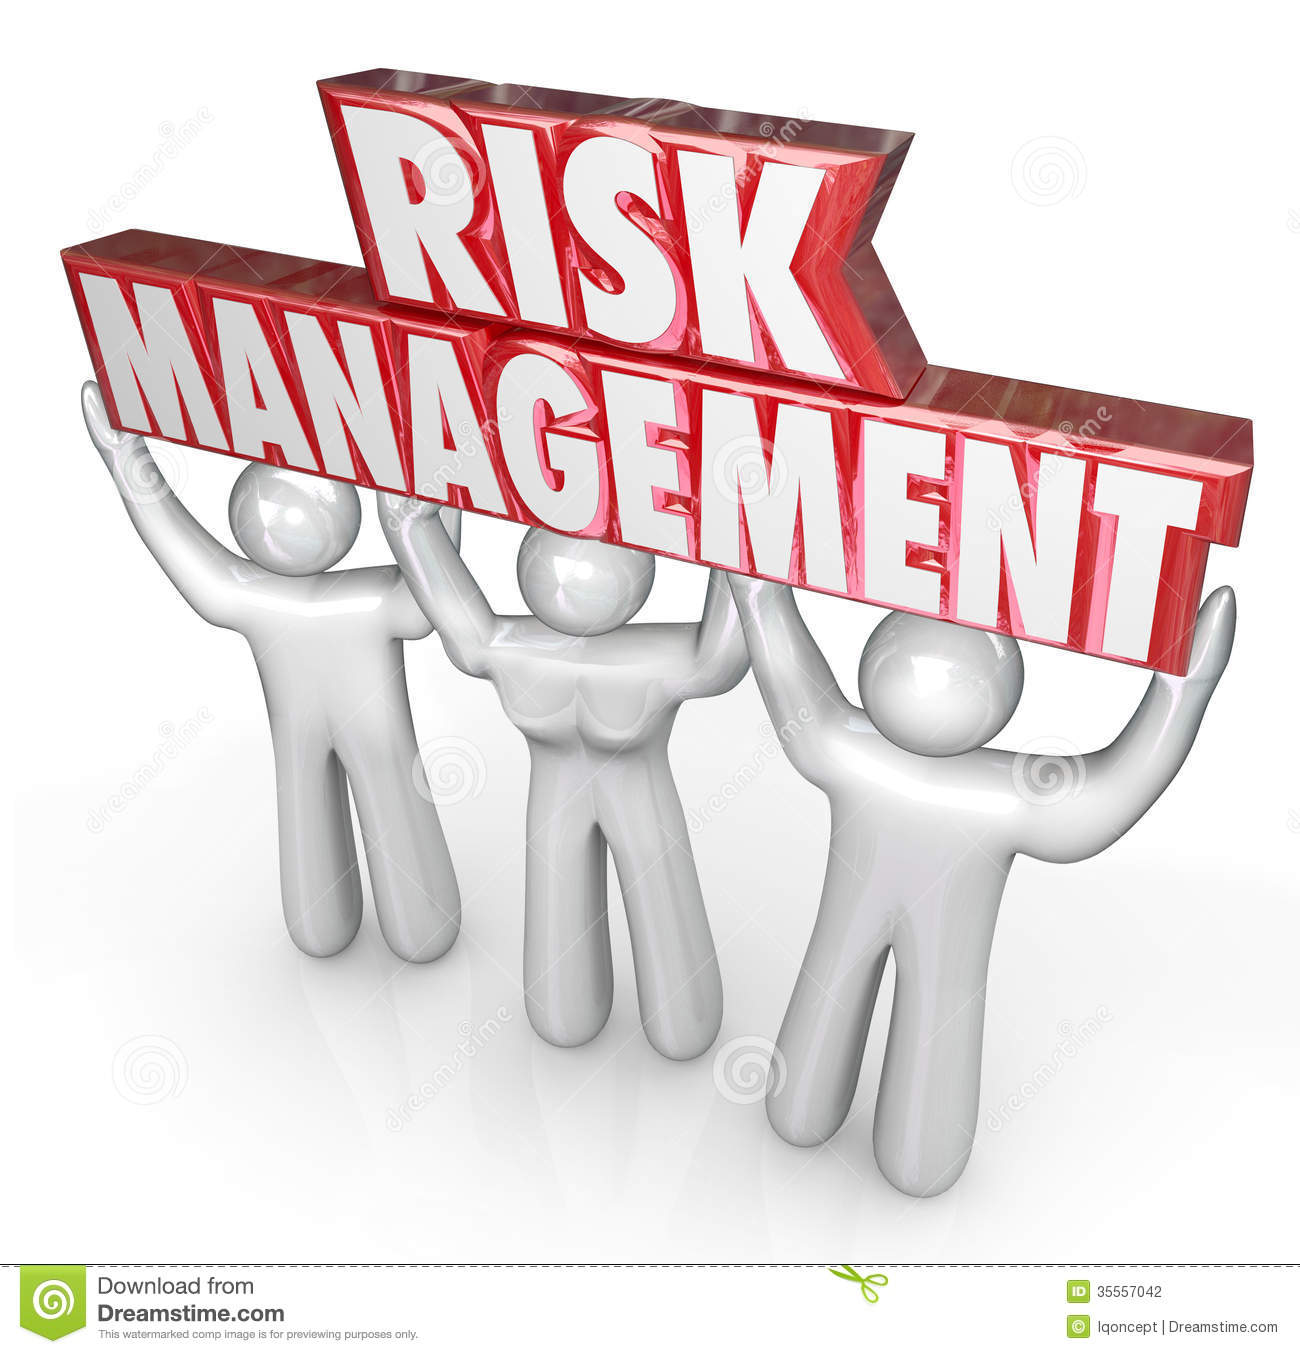 Risk Management Words Lifted By Team Of People Or Workers To